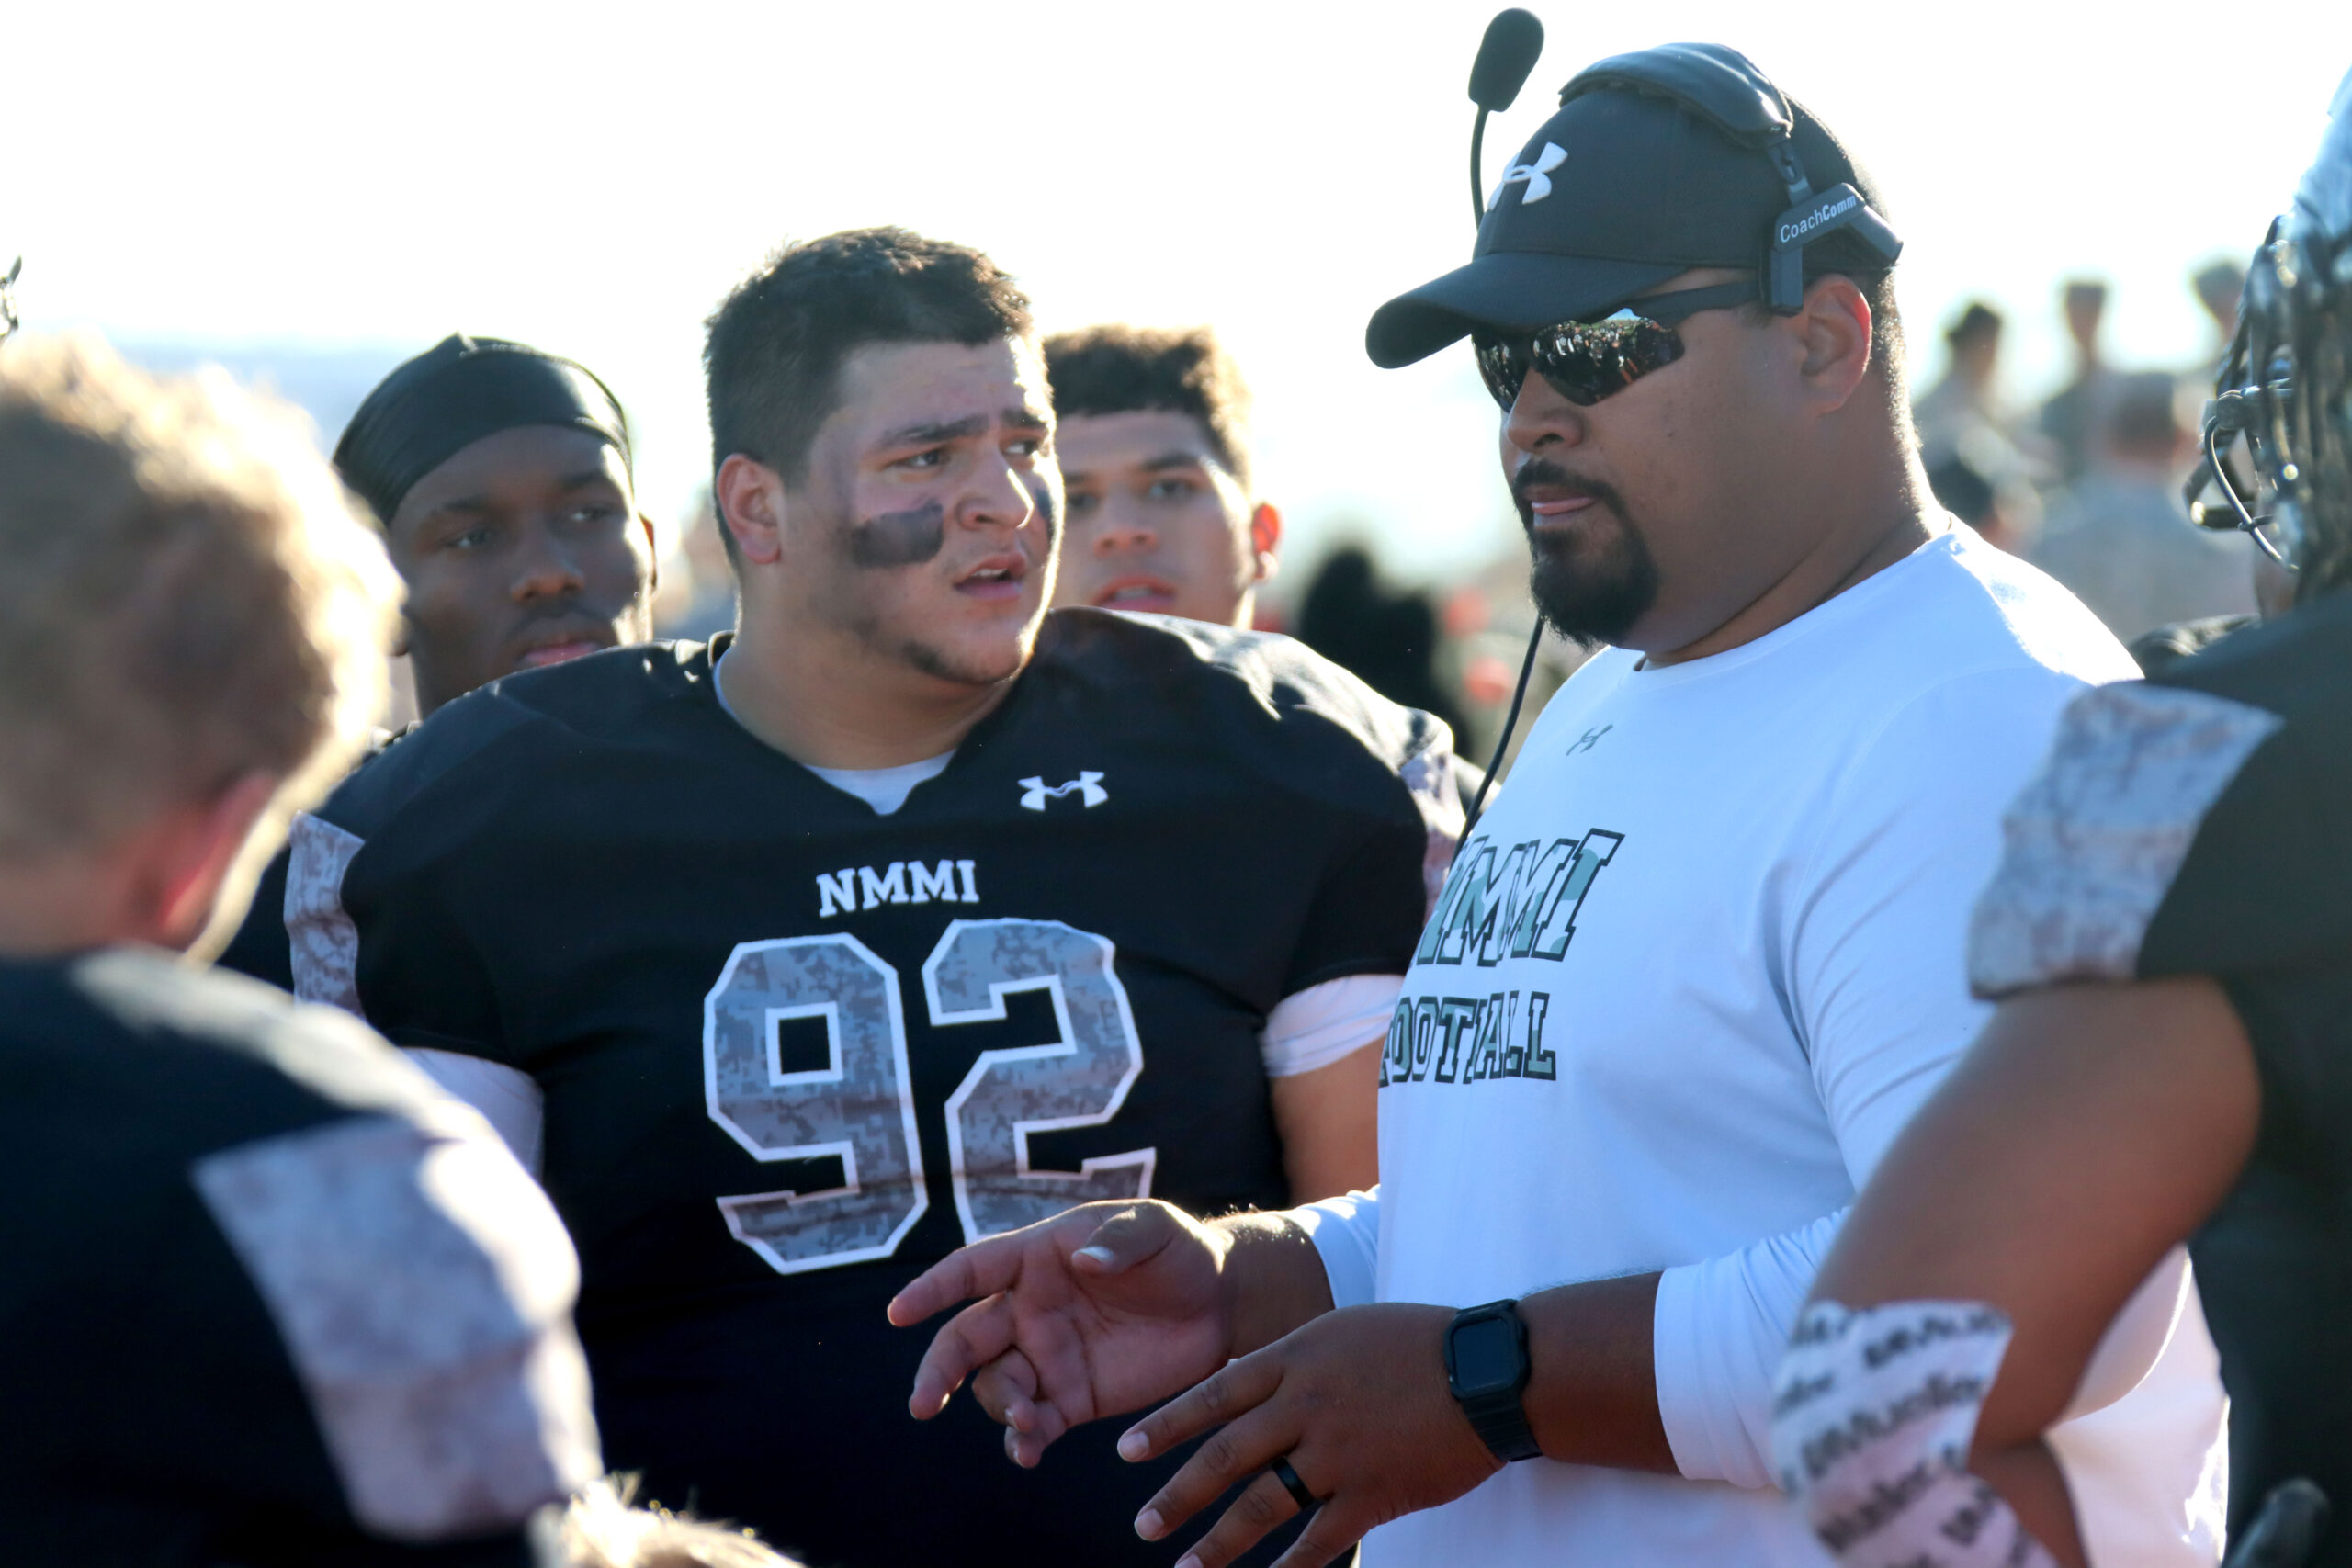 New Mexico Military Institute's Kurt Taufa'asau Selected as 2021 ACCFCA  Coach of the Year - AFCA